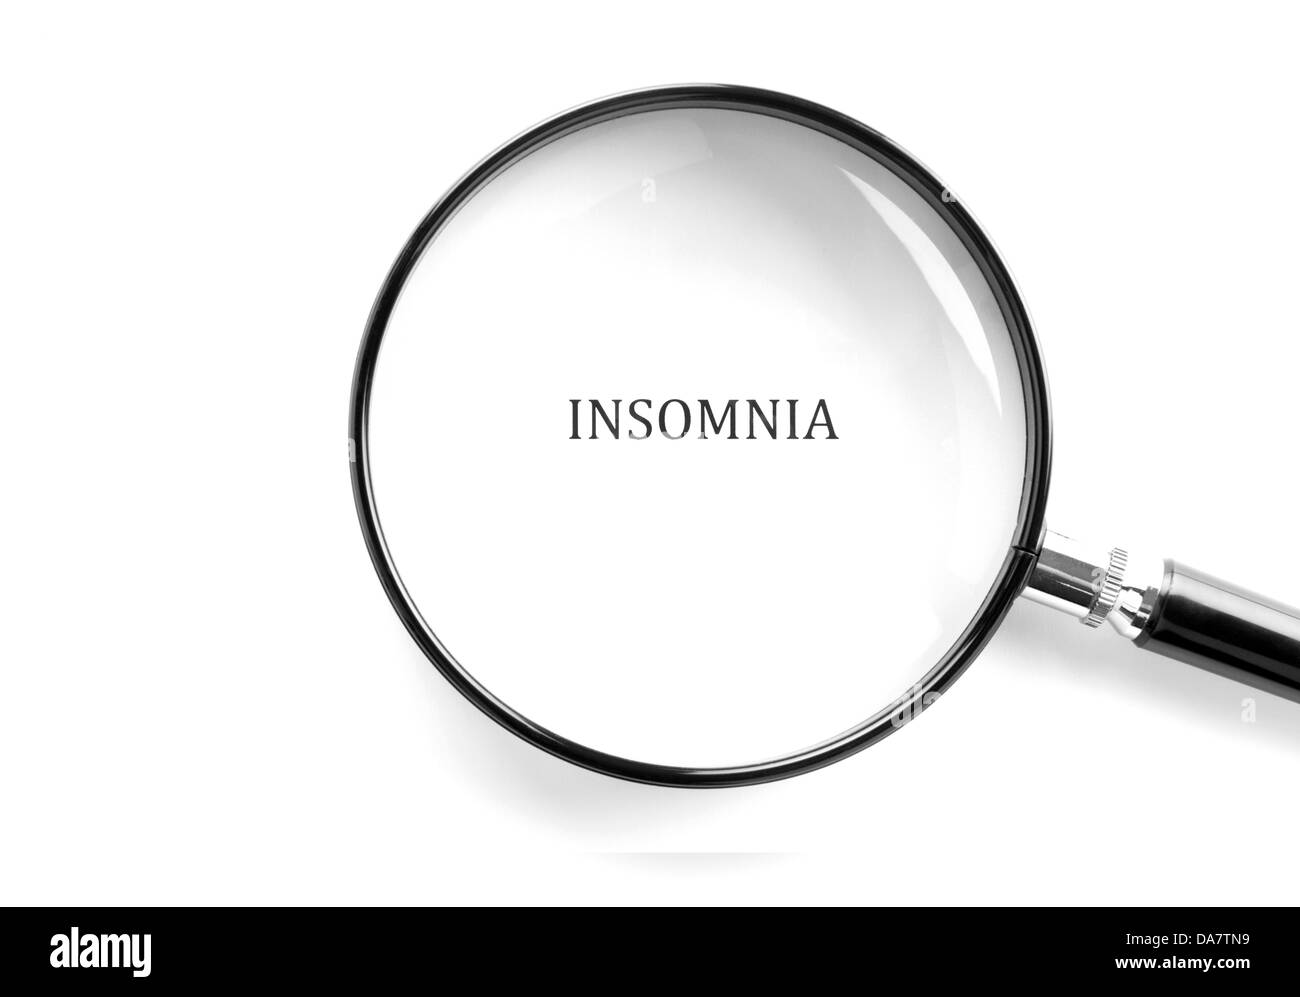 Concept photo showing the word insomnia with magnifying glass over it Stock Photo